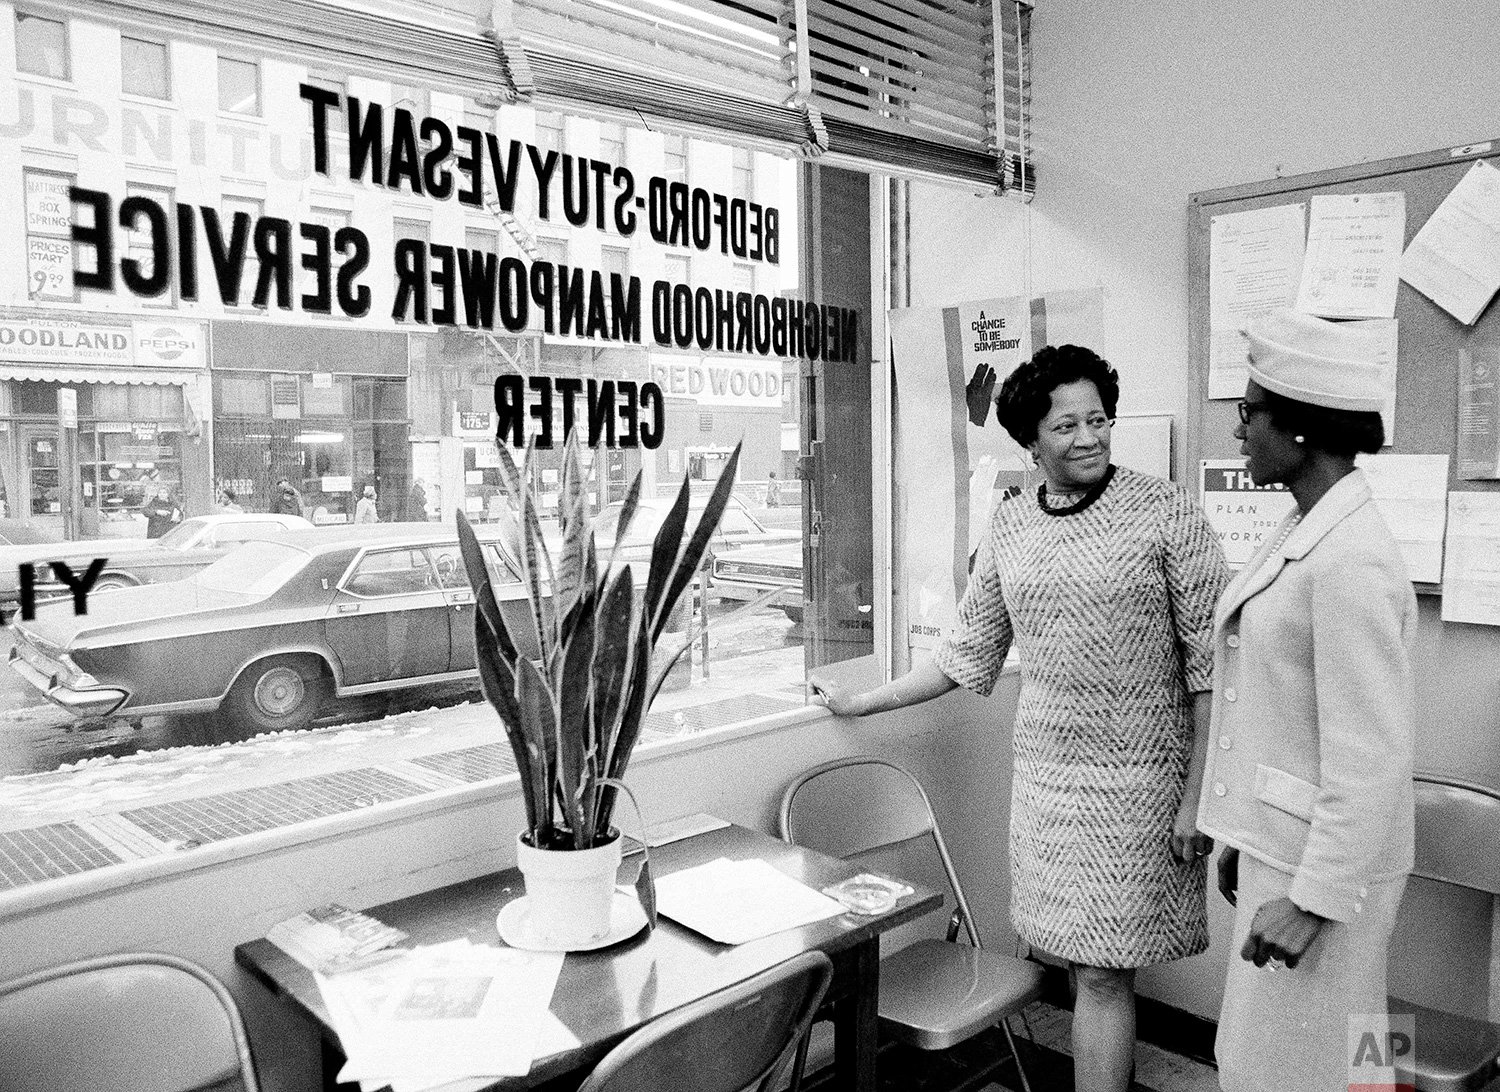  Mrs. Shirley Chisholm (right) is seen chatting with Mrs. Lucille Rose, managing director (designated regional director) of the Bedford-Stuyvesant Neighborhood Manpower Service Center on Dec. 20, 1968.  (AP Photo/ John Duricka) 